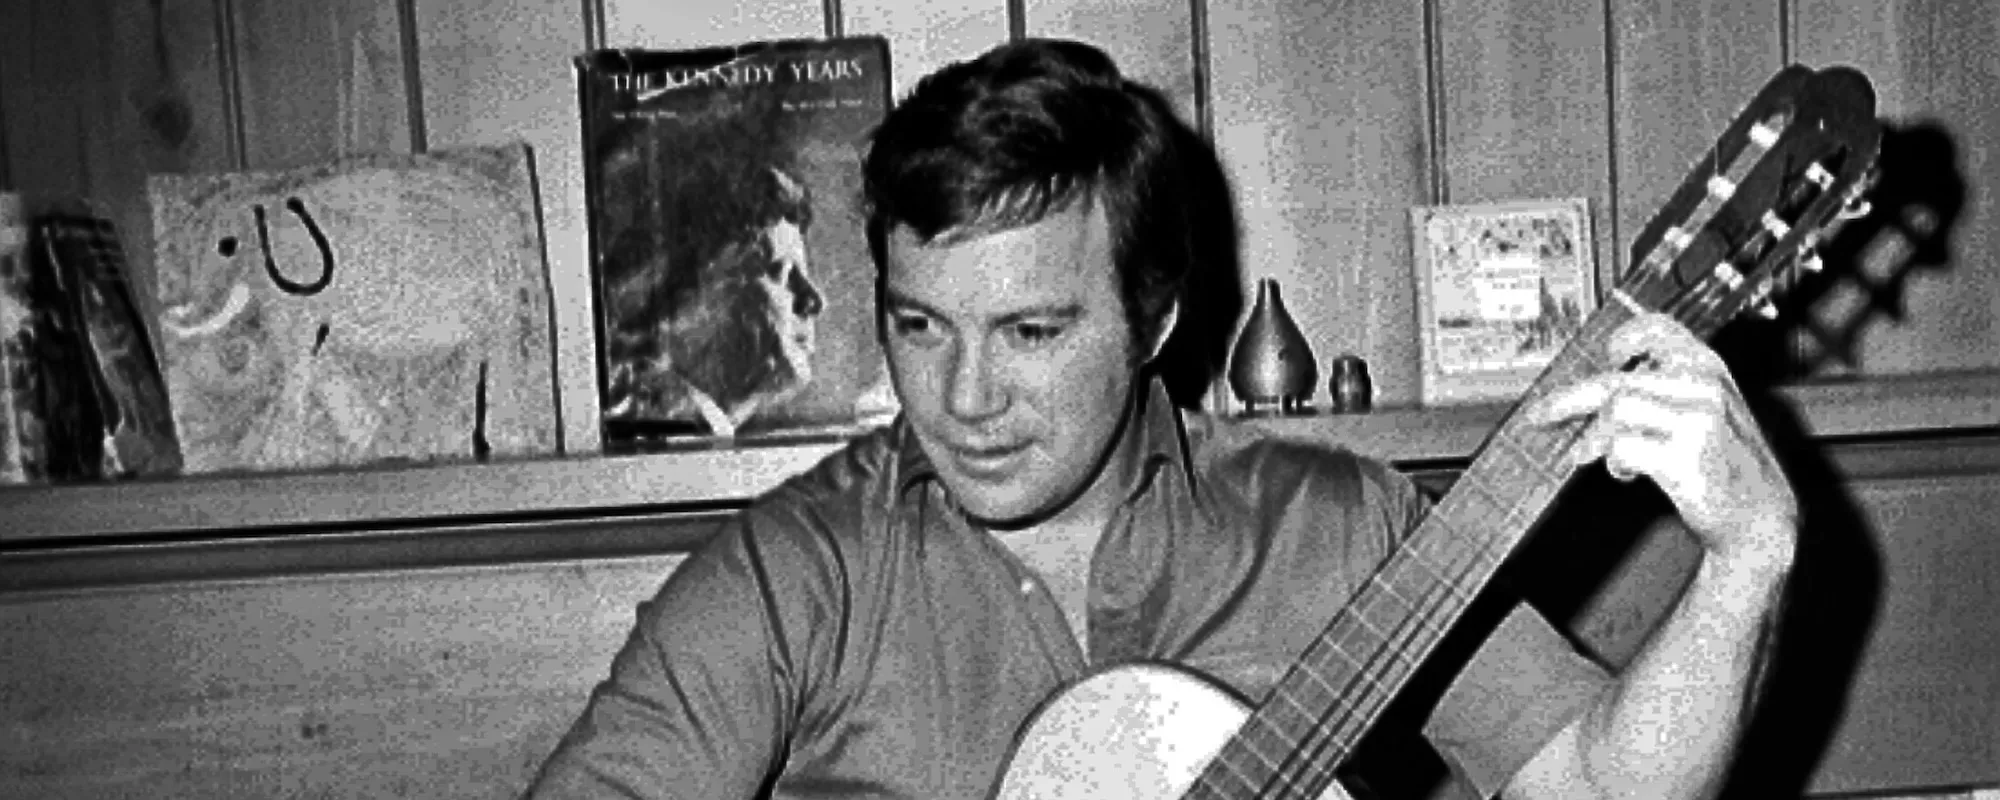 Bob Dylan, Black Sabbath, and Beyond: 5 Iconic Songs You Didn’t Know William Shatner Covered